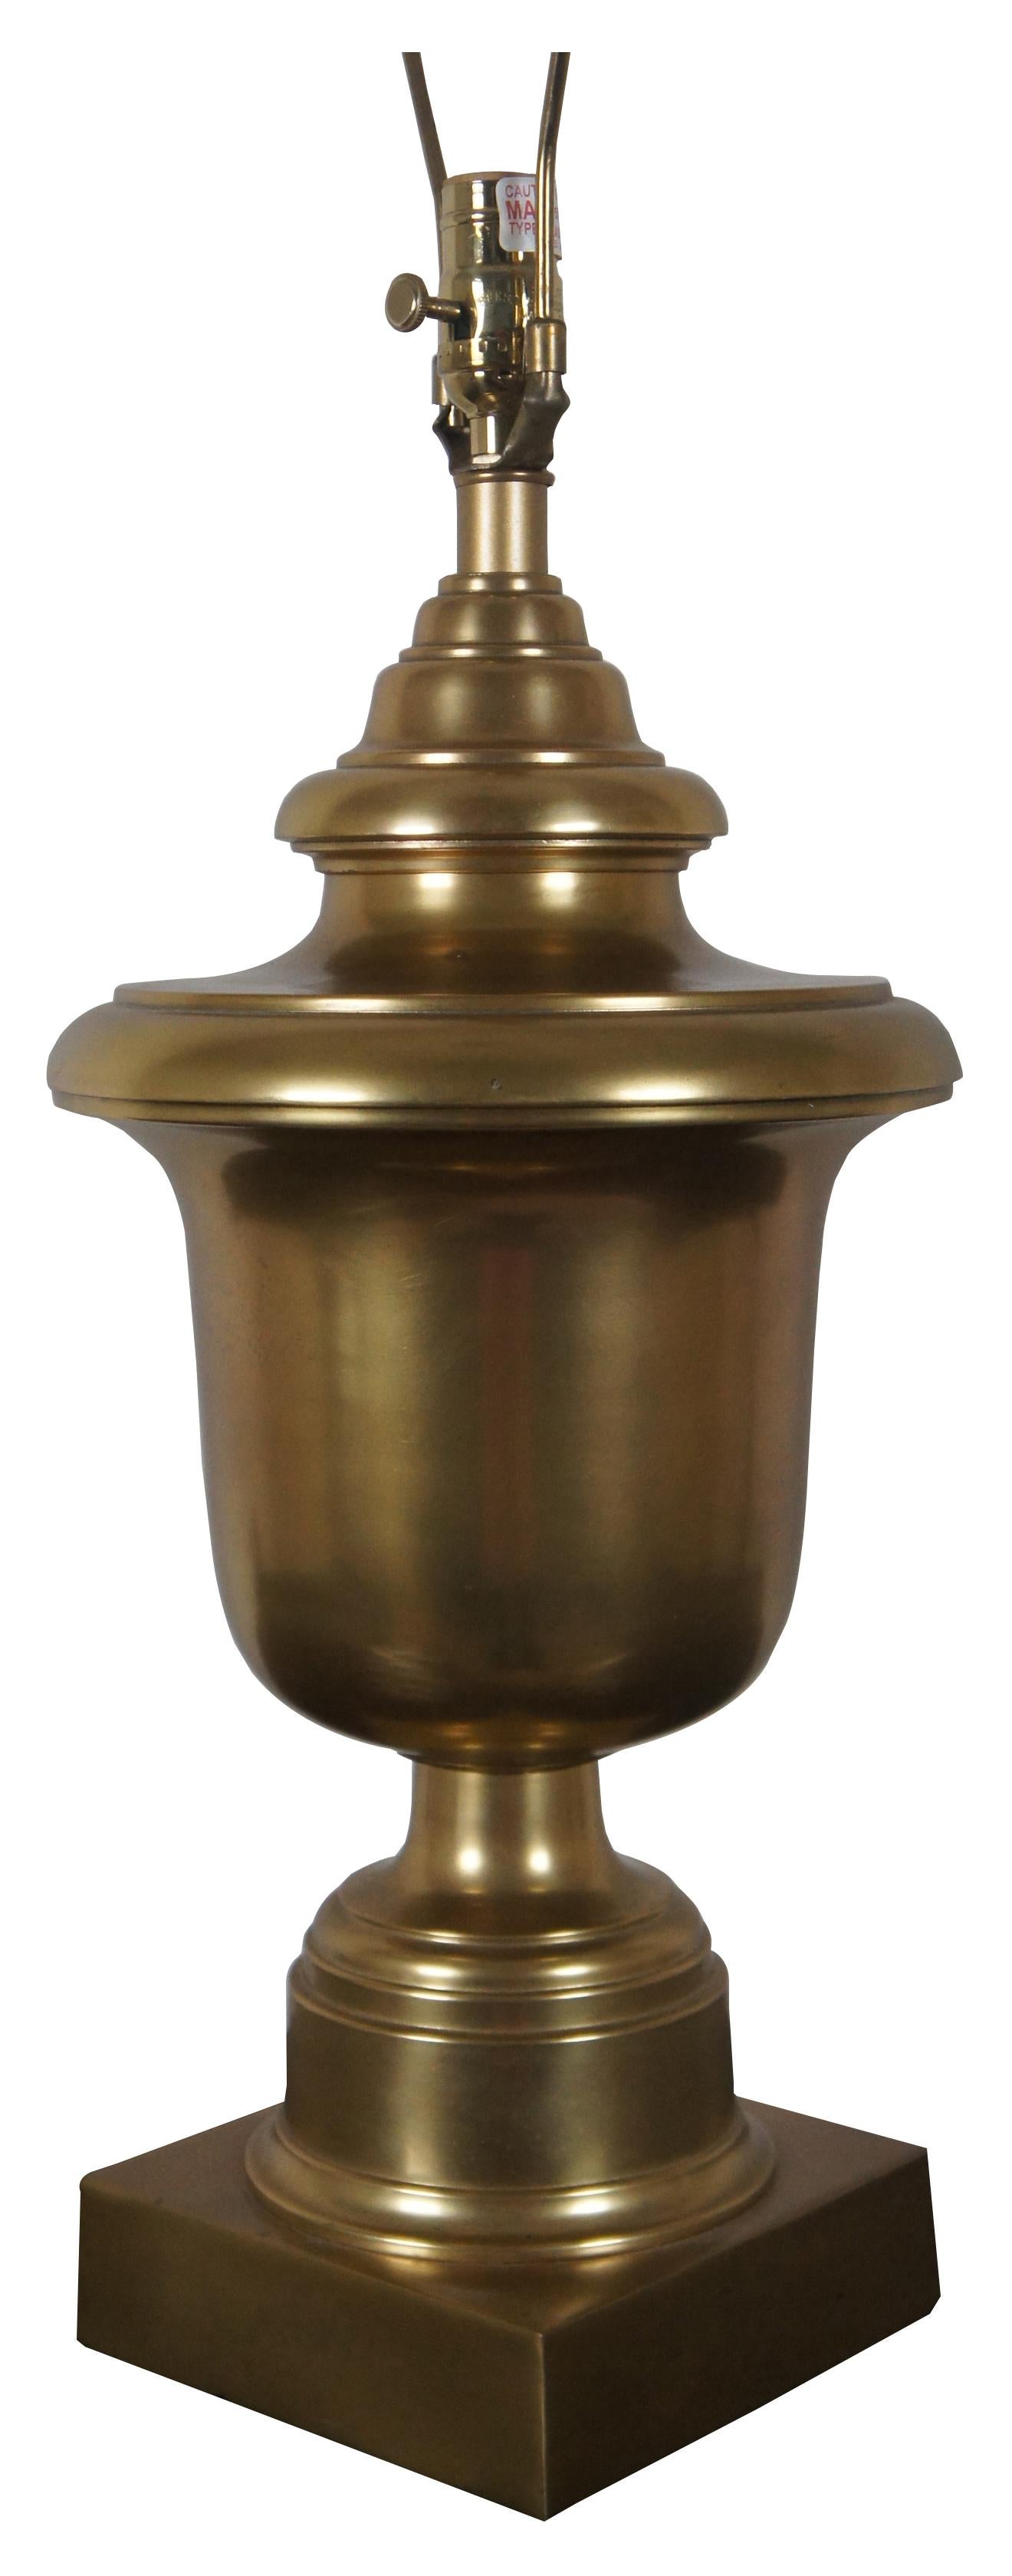 Robert Abbey Templeton trophy urn style brushed brass table lamp; no shade.

Measures: 10” x 24” / Height to Top of Finial – 32.25” (Diameter x Height).